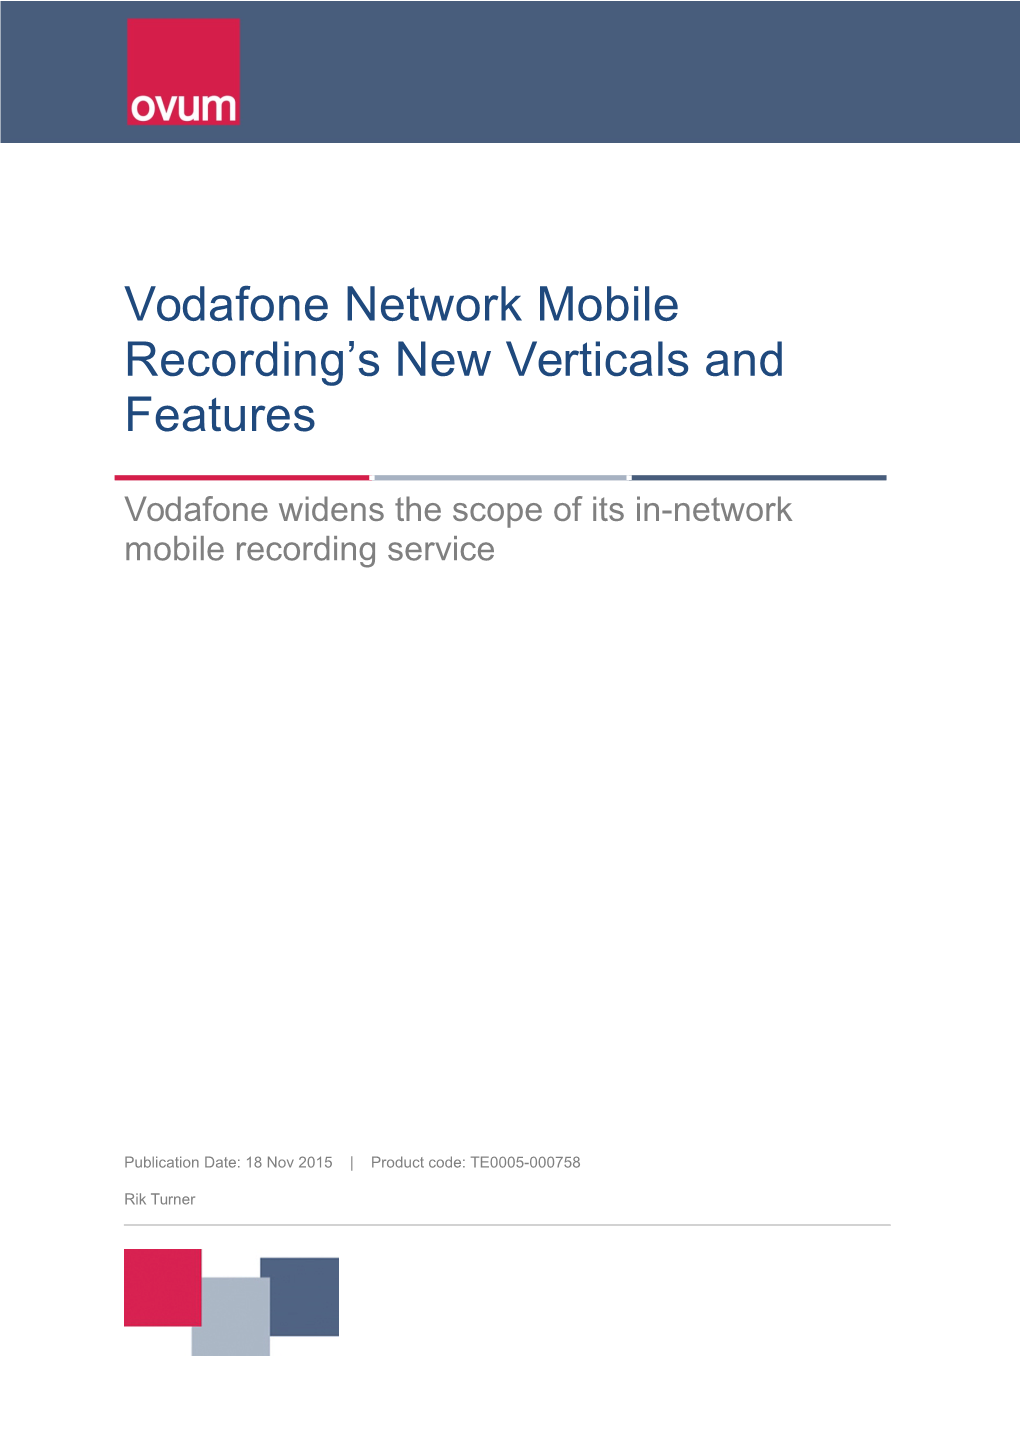 Vodafone Network Mobile Recording's New Verticals and Features